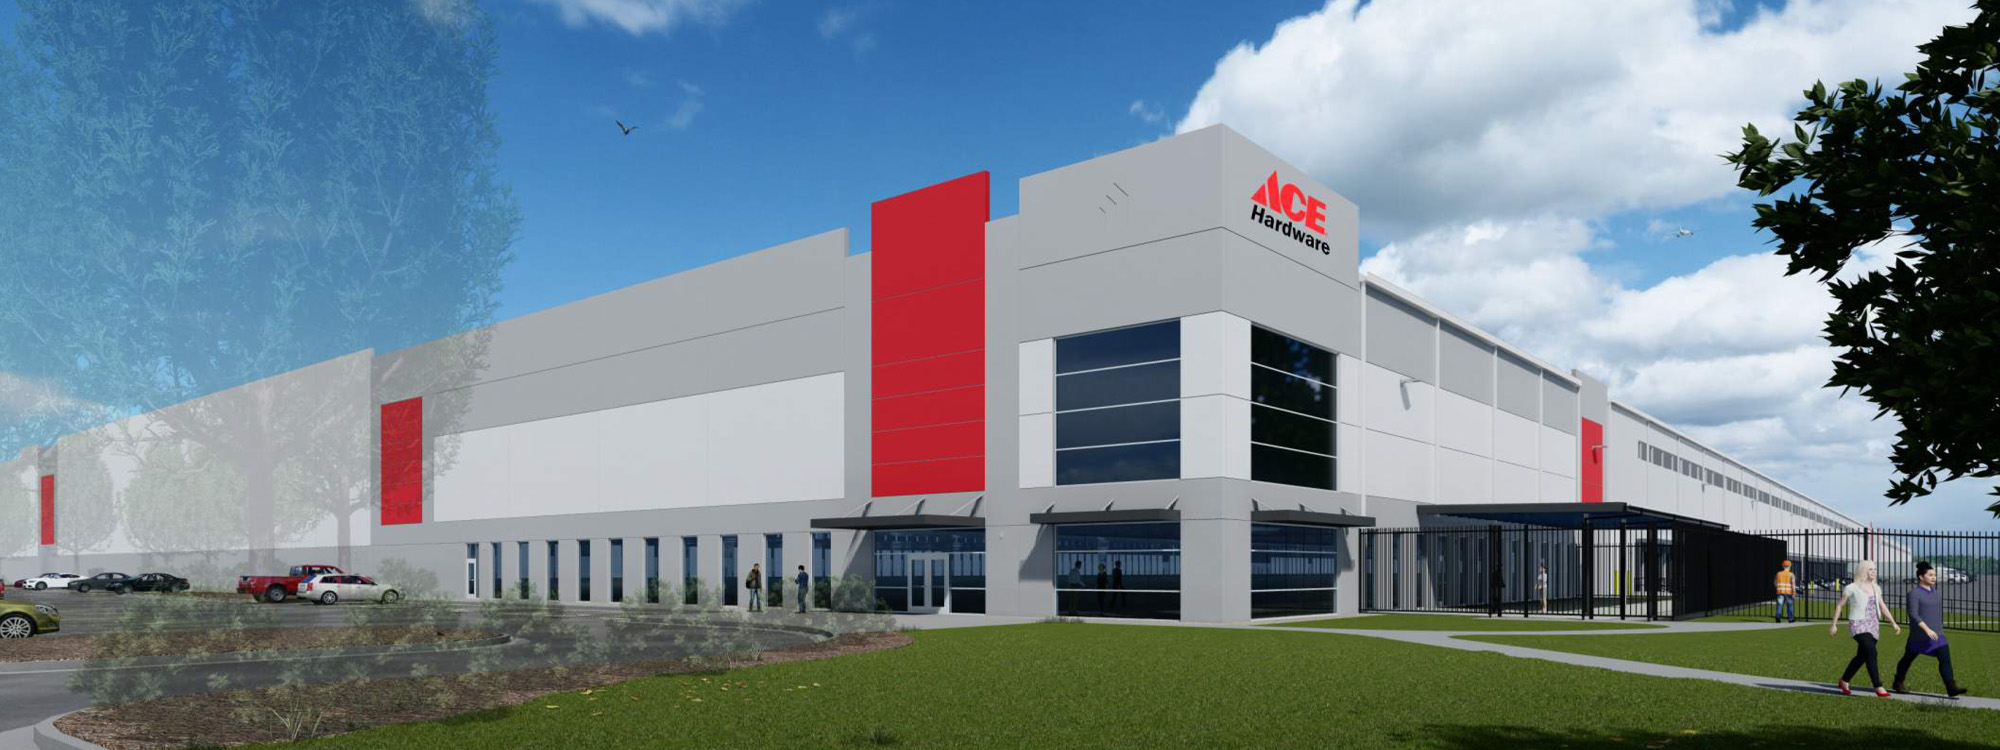 Hunt Midwest to build 1.5 million-square-foot, build-to-suit facility for Ace Hardware at KCI 29 Logistics Park